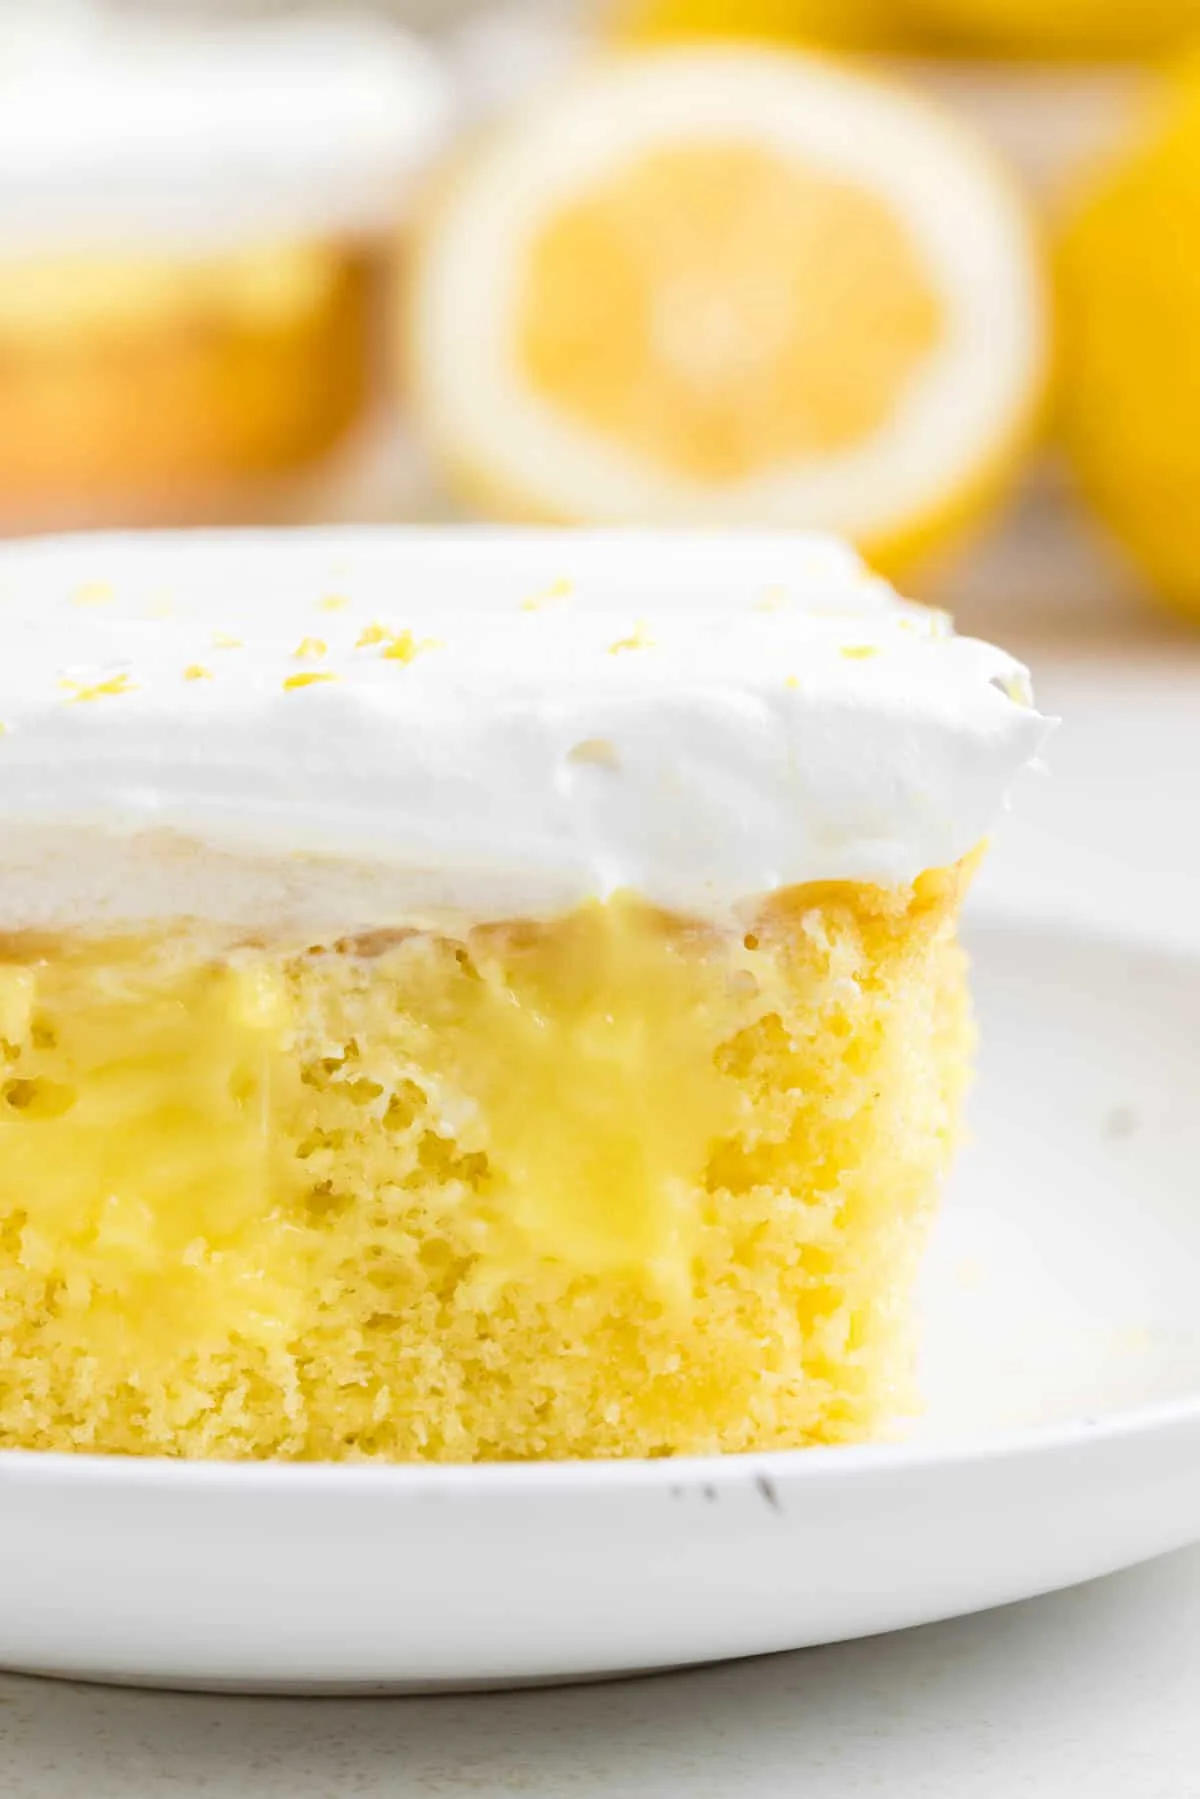 Lemon Poke Cake is a sweety and tangy dessert recipe made with boxed lemon cake mix, lemon instant pudding mix and Cool Whip.